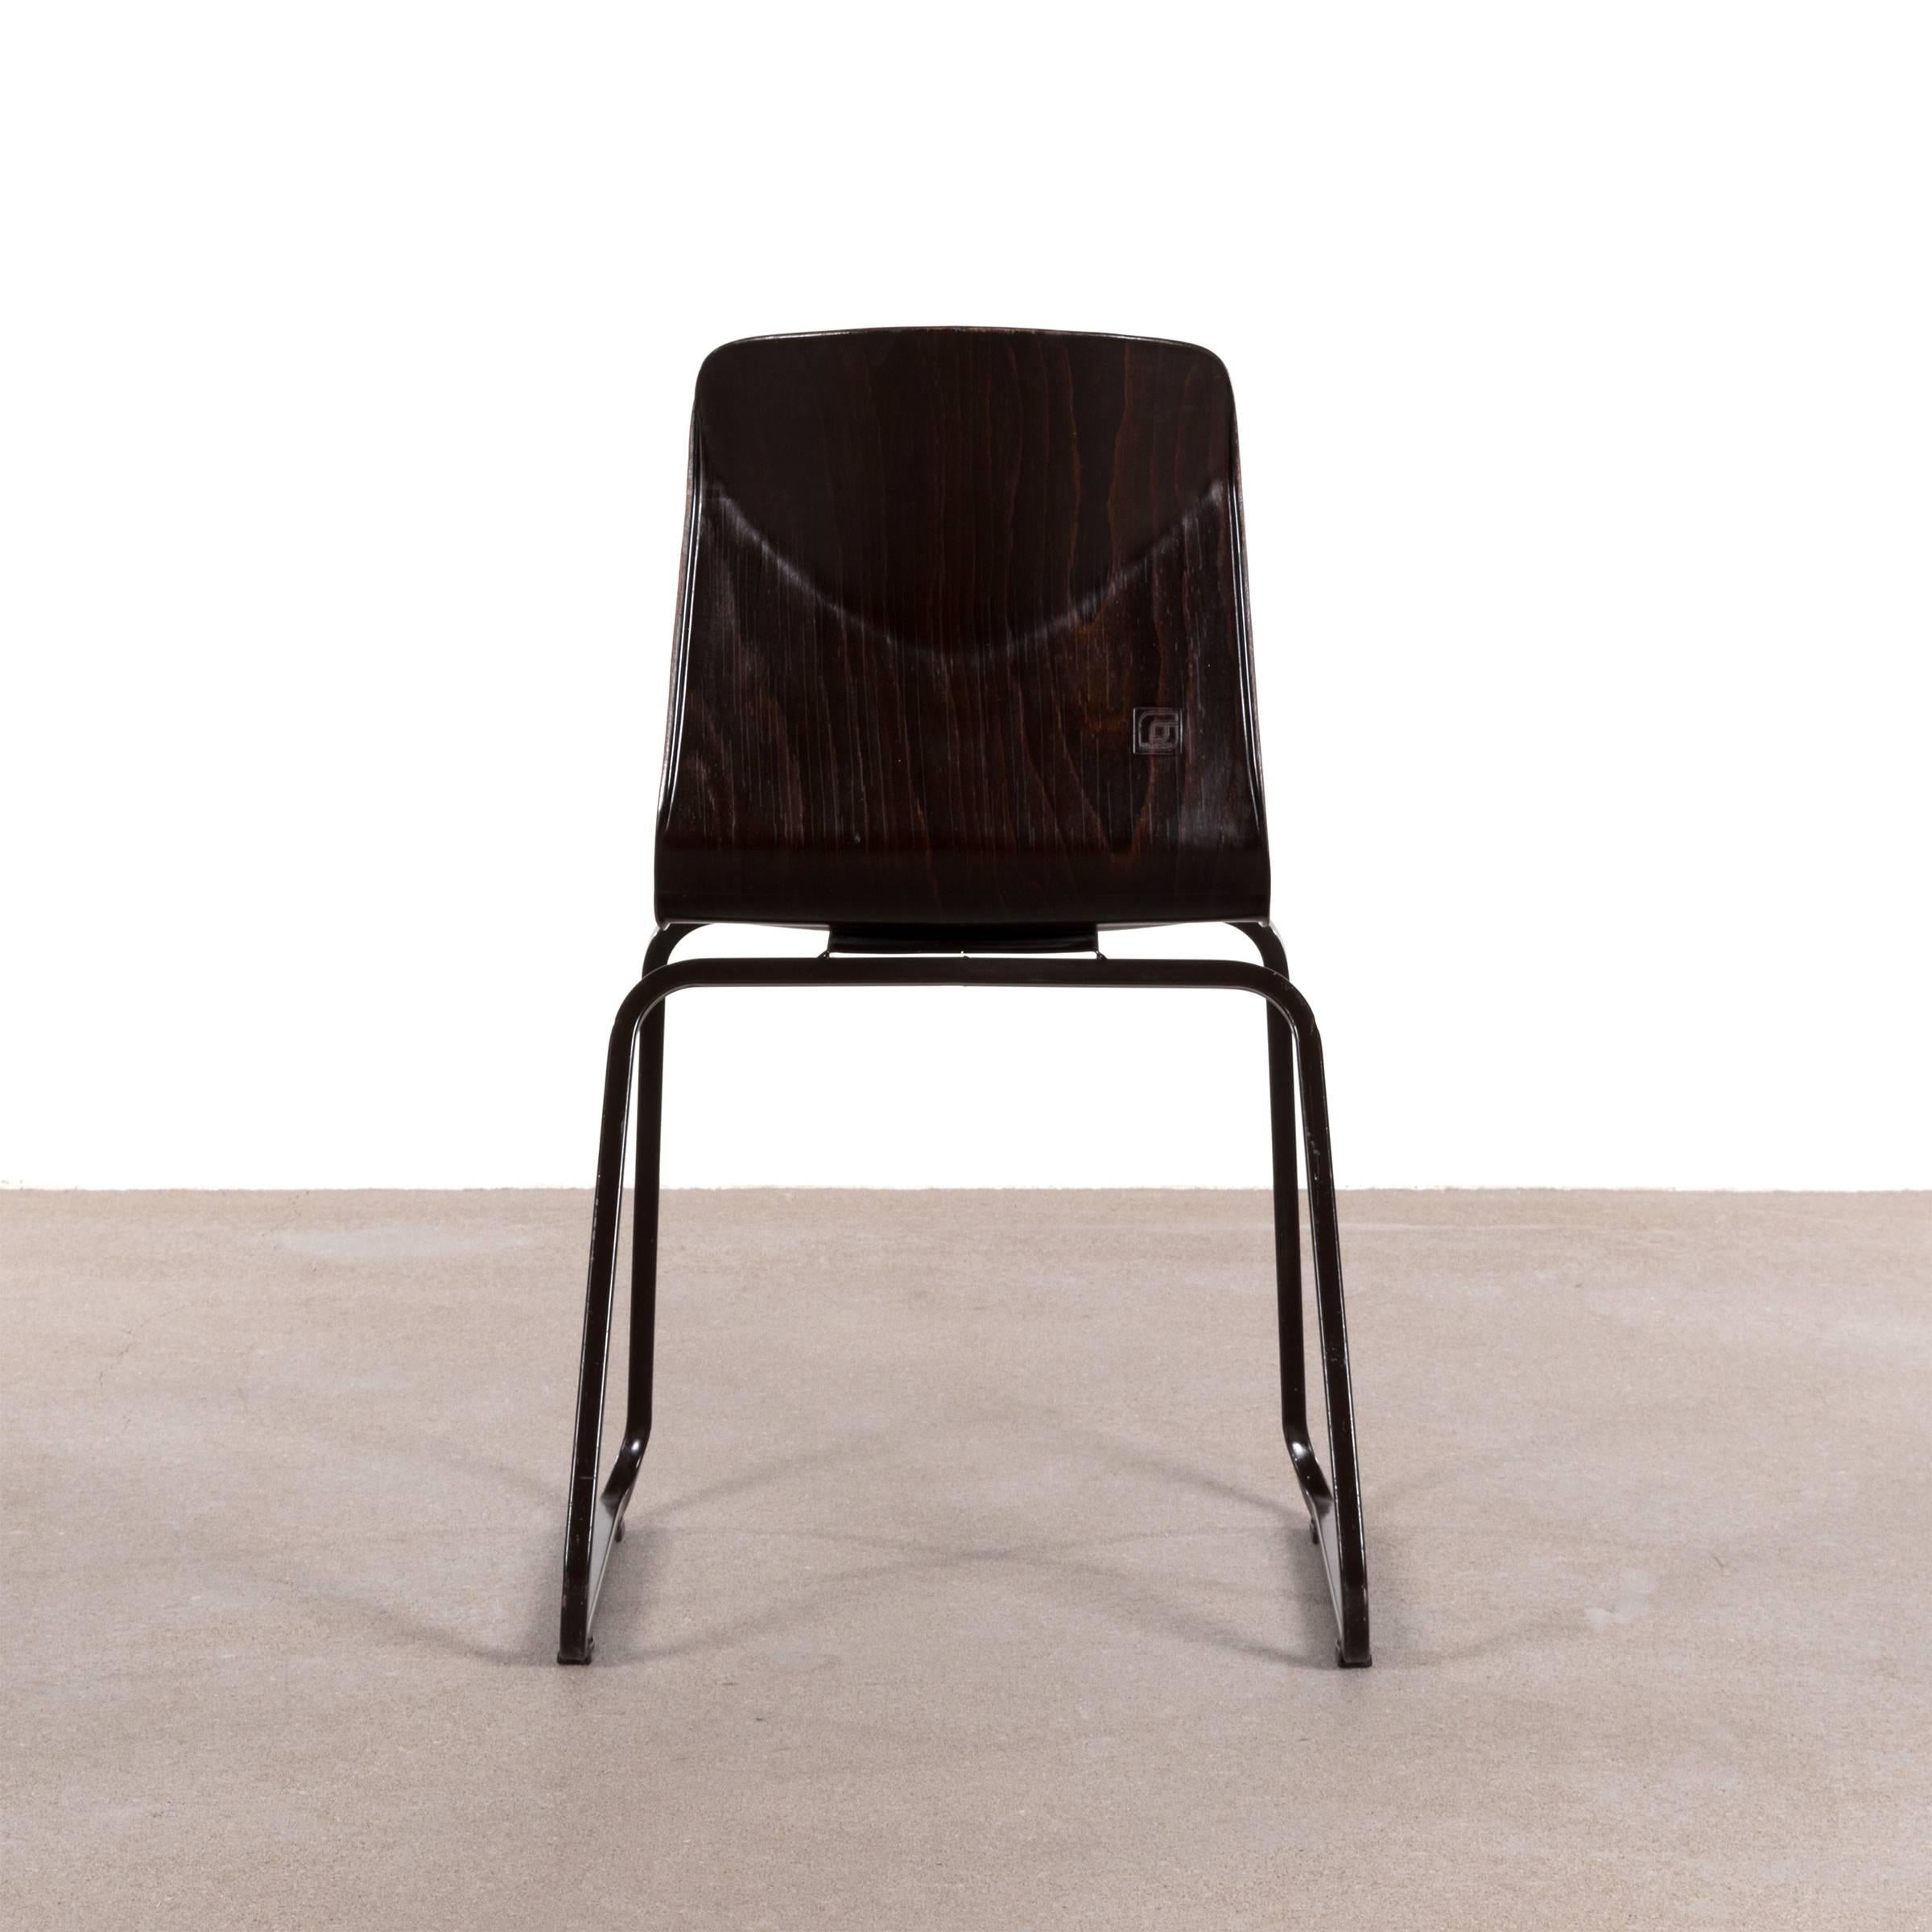 Dutch Multiple Galvanitas Industrial Stackable Plywood Chairs S23, Netherlands